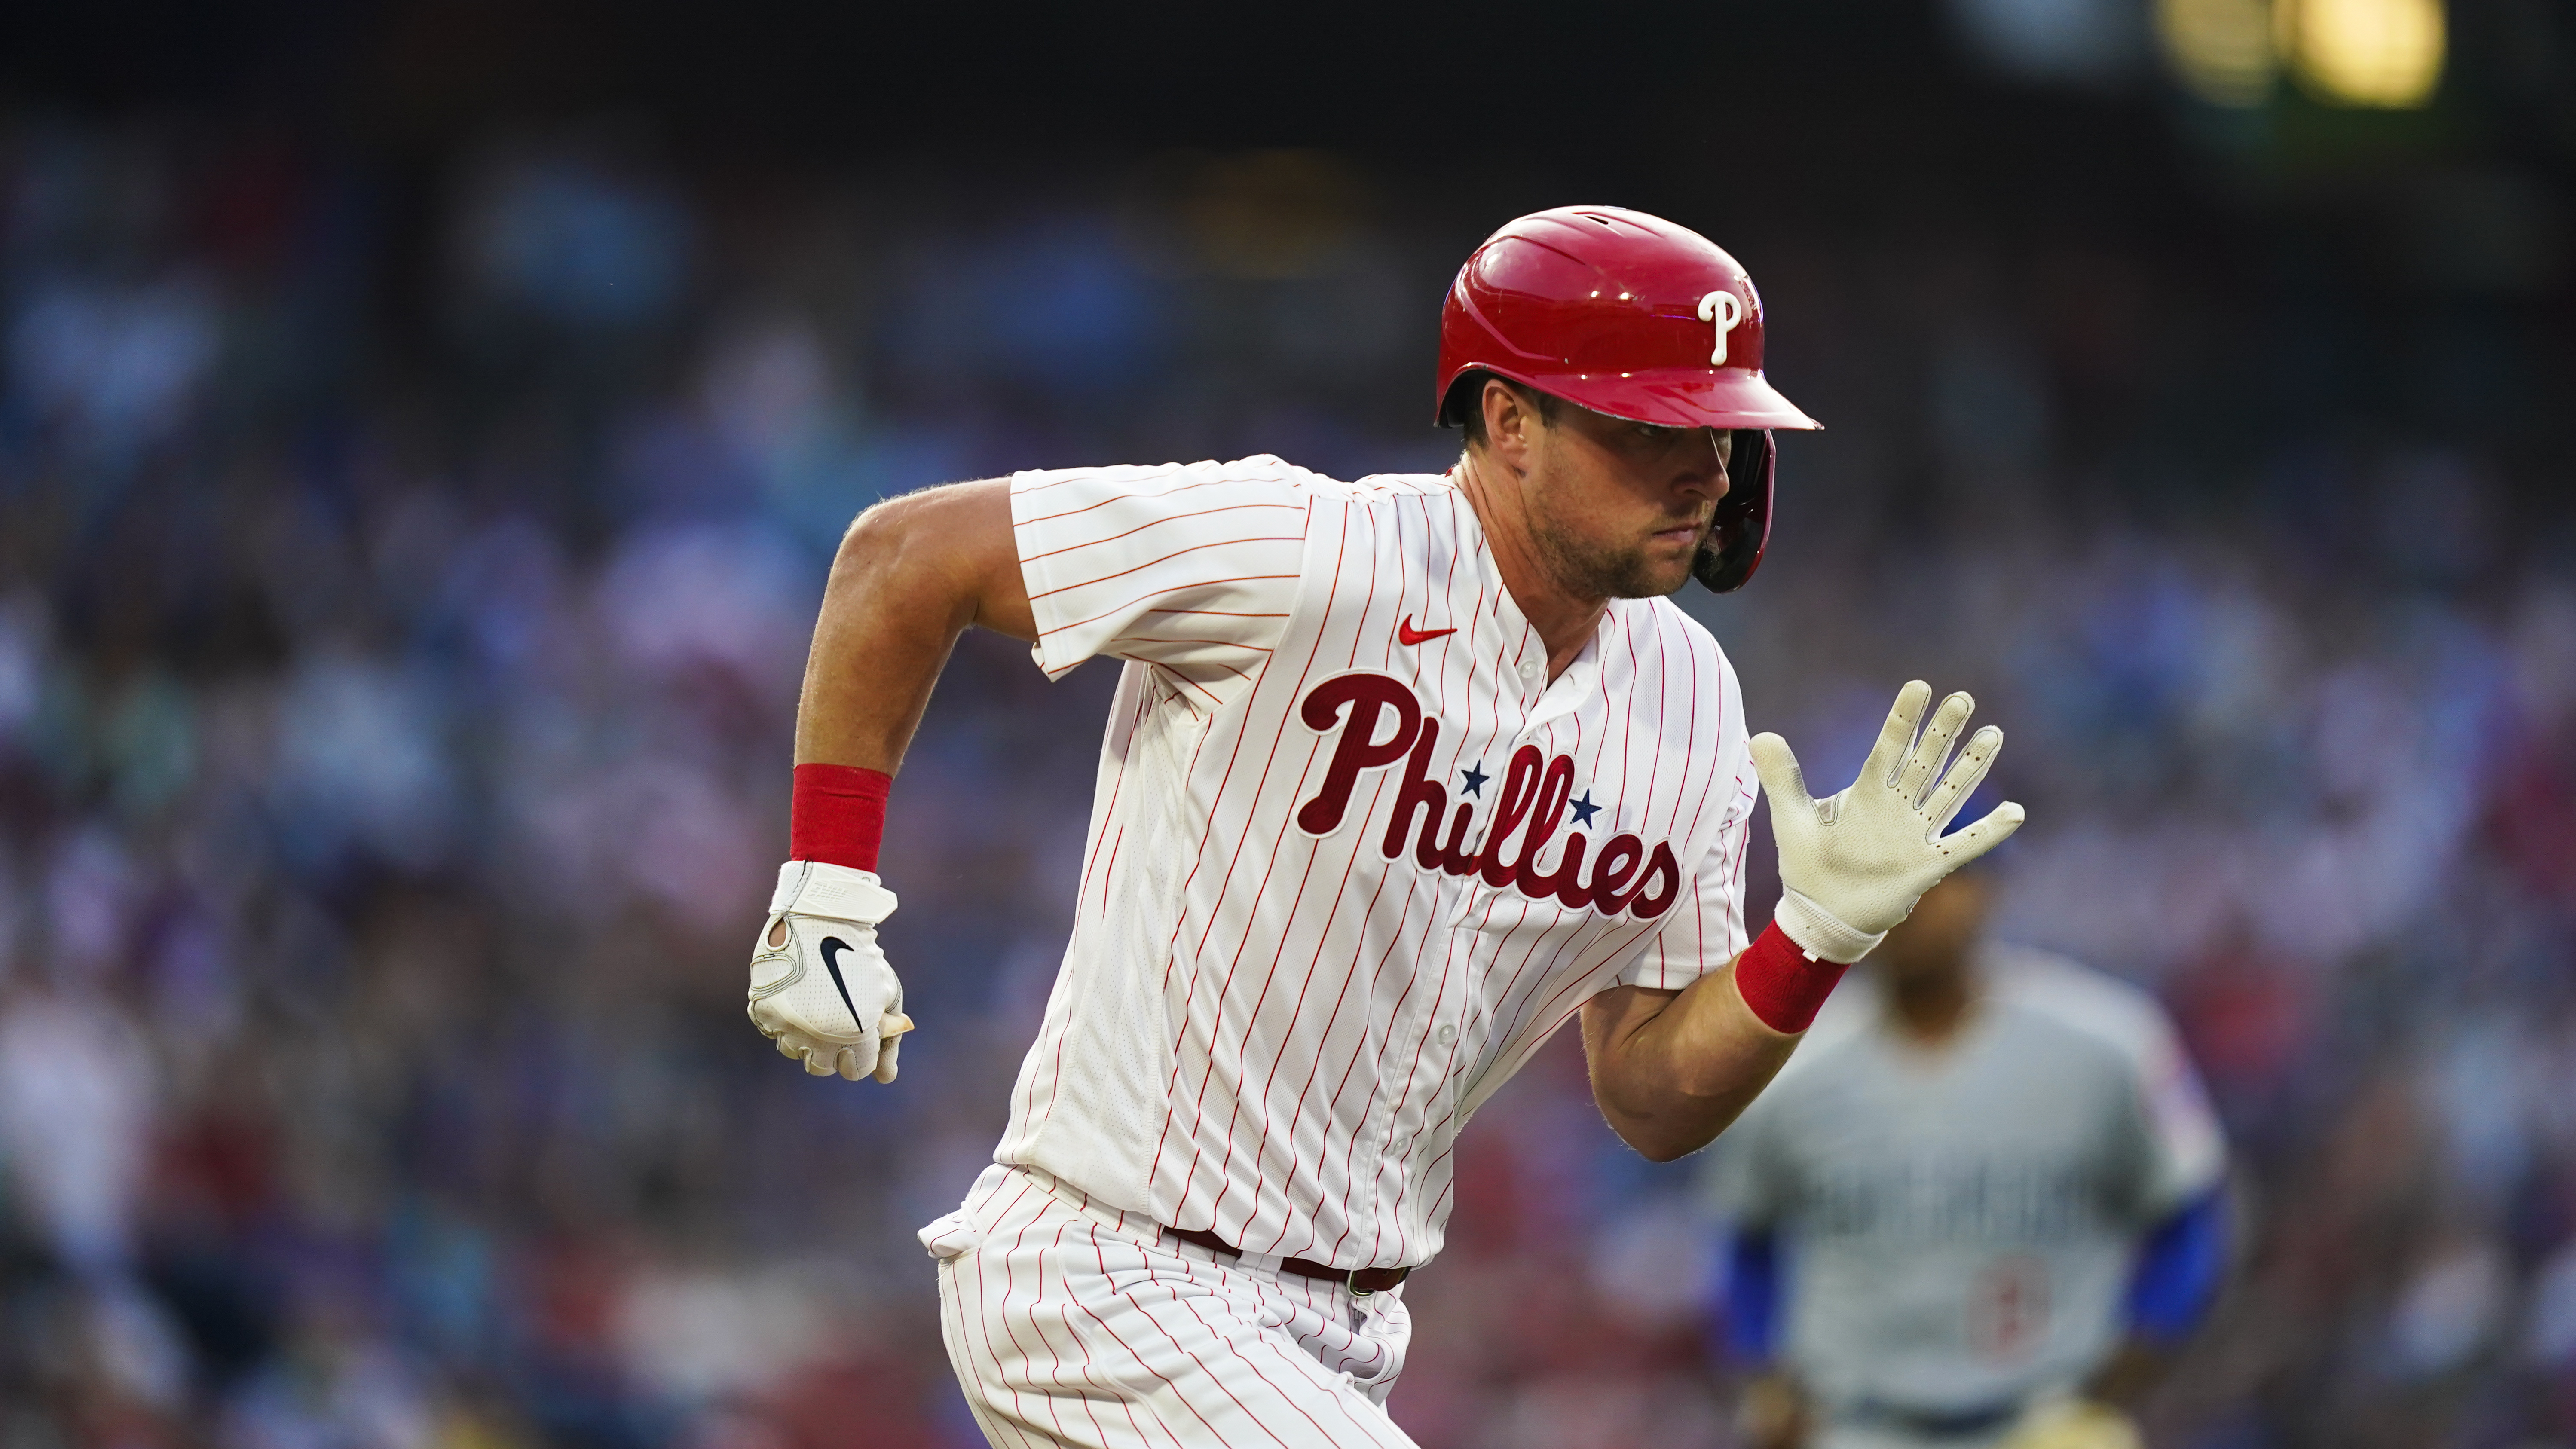 Atlanta Braves at Philadelphia Phillies free live stream (7/25/22) How to watch, channel, time